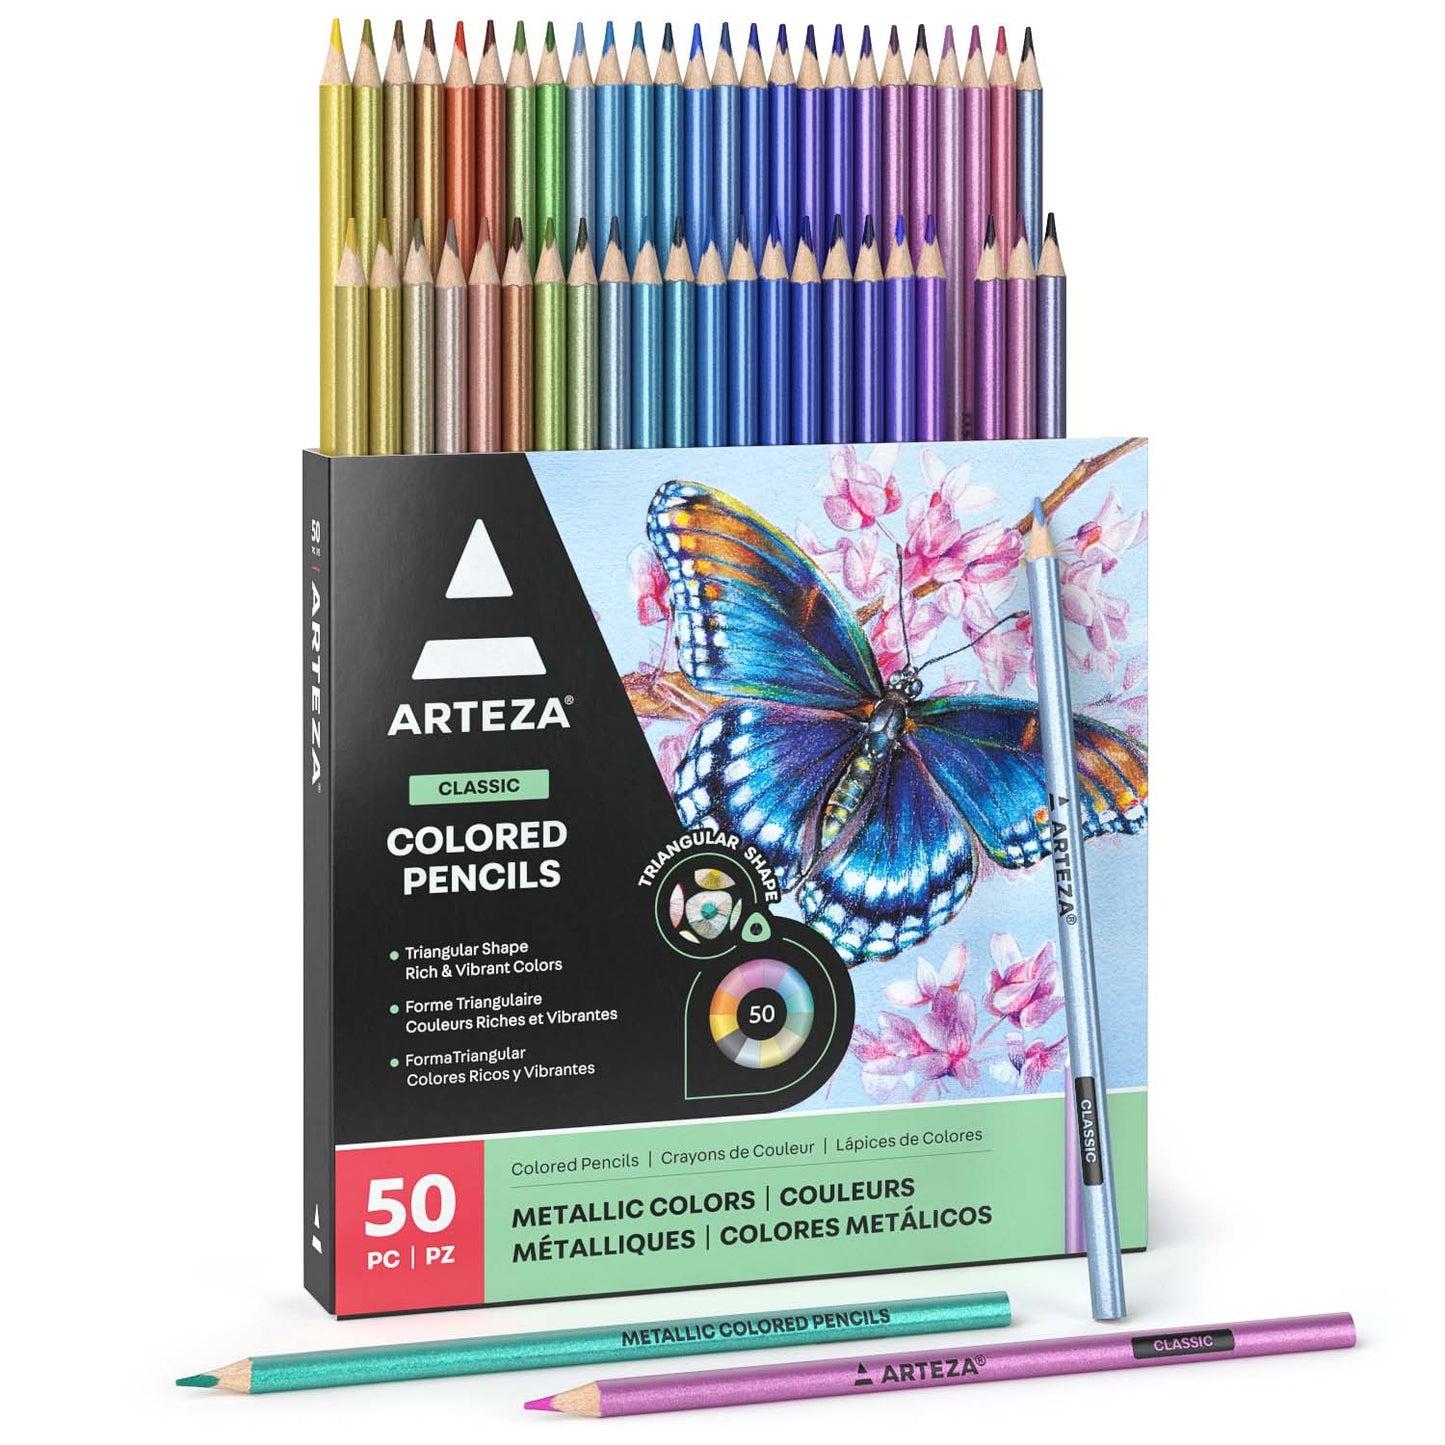 Top 5 Best Colored Pencils For Adult Coloring Books Latest In 2023 